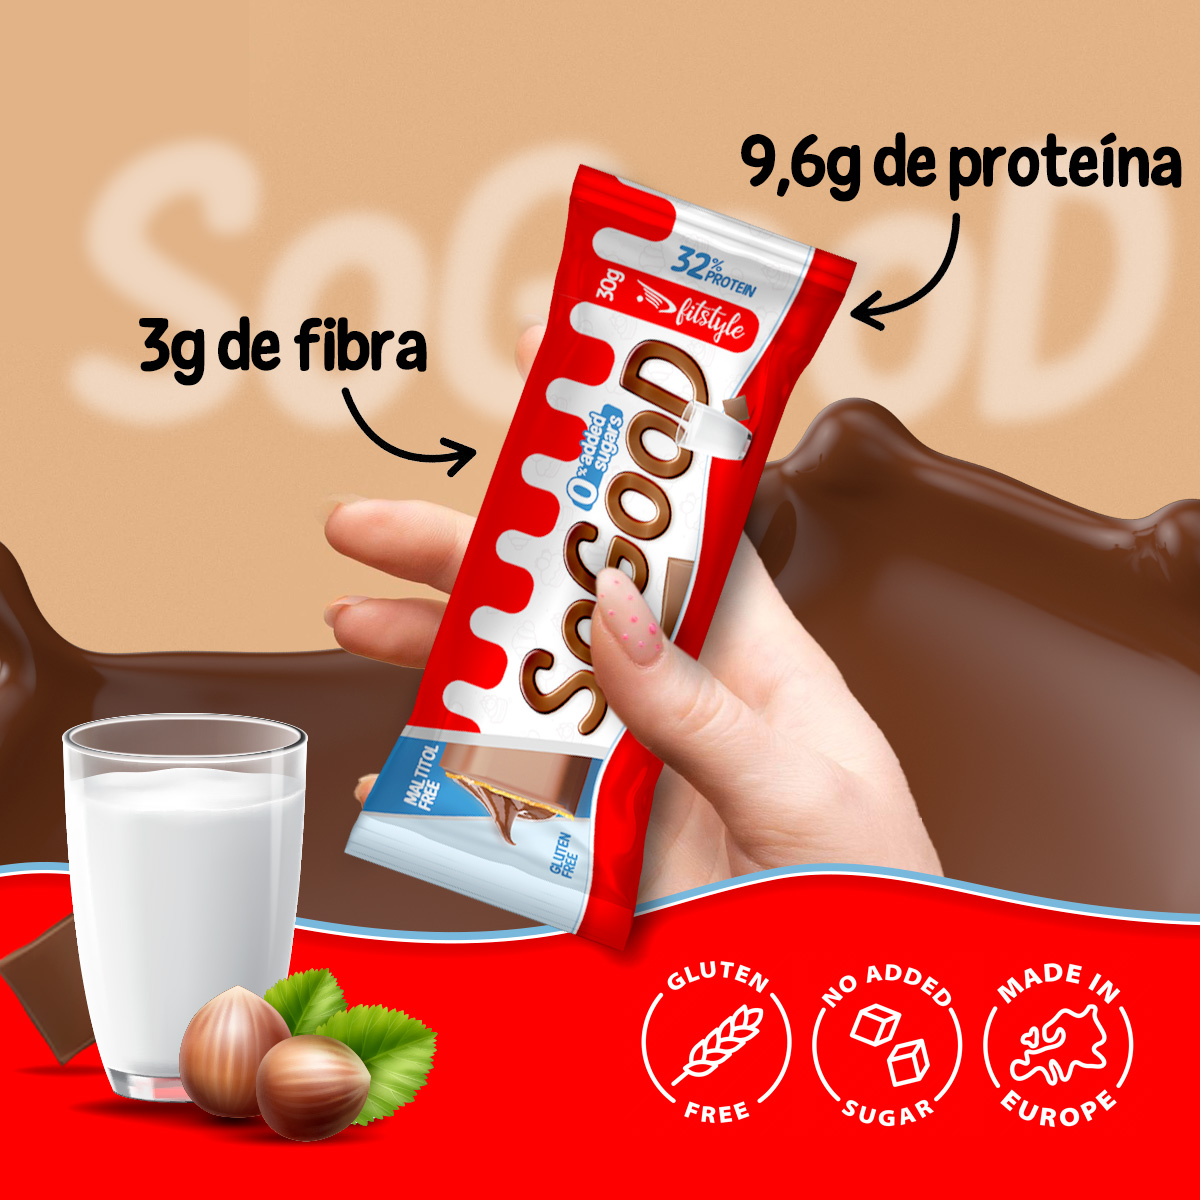 Snack Proteico FITSTYLE